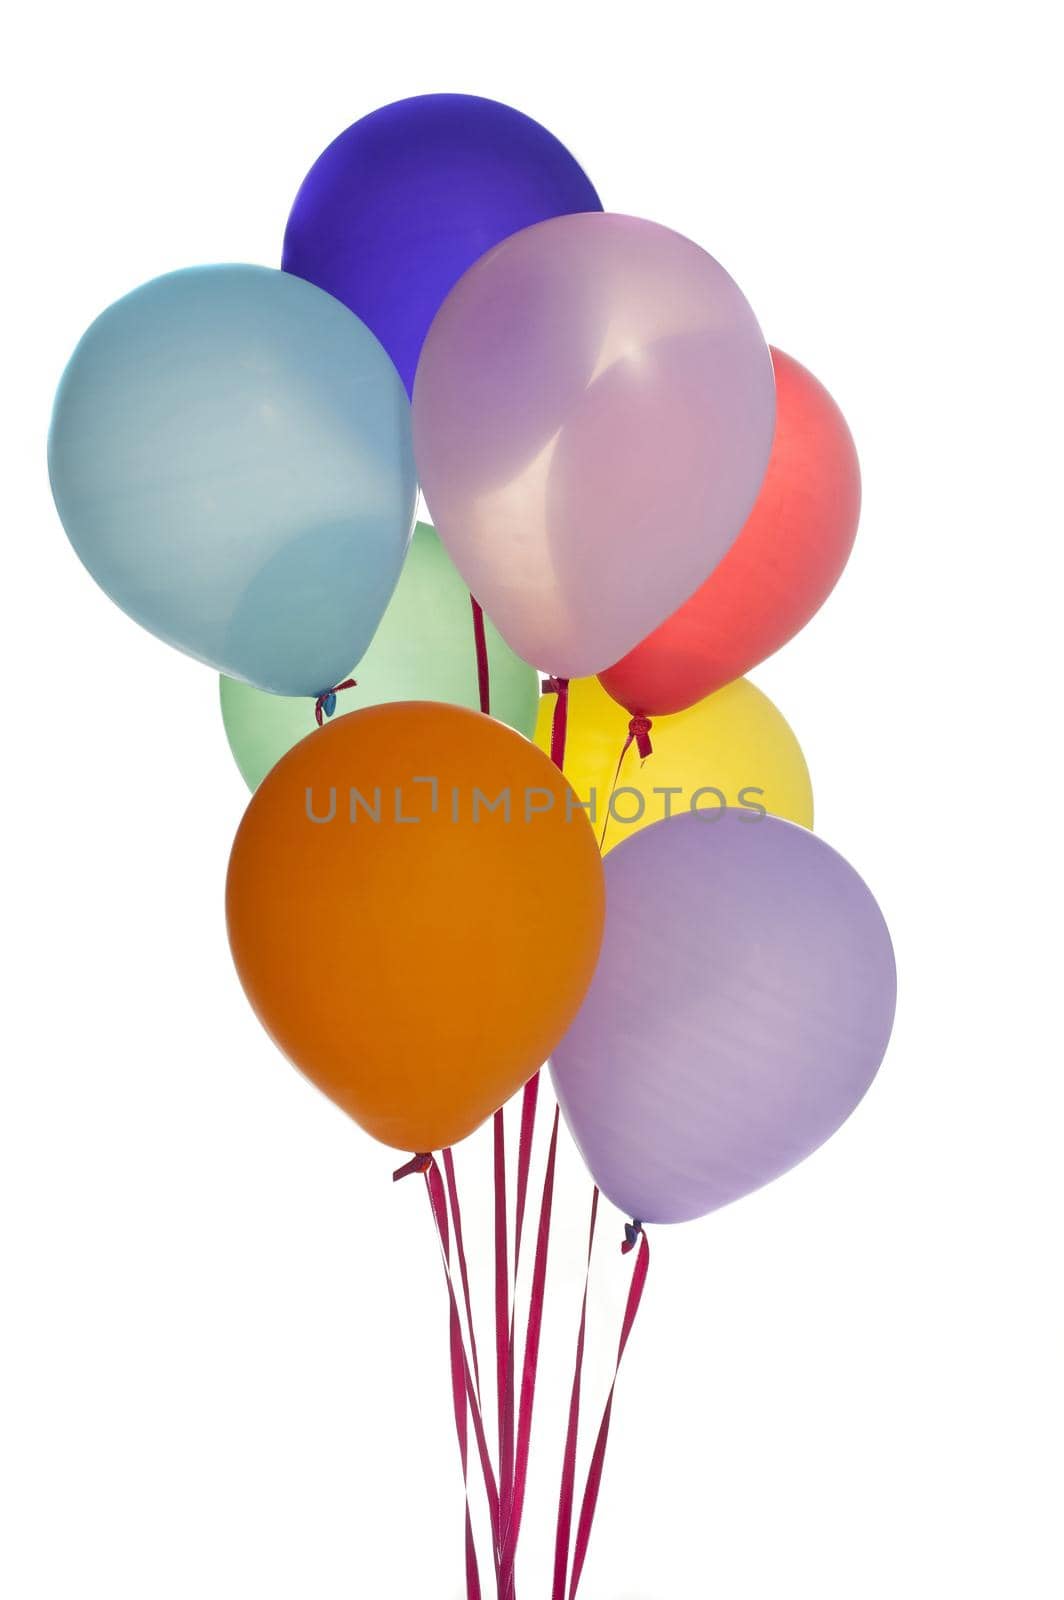 Colored Balloons Isolated on White Background by sanisra